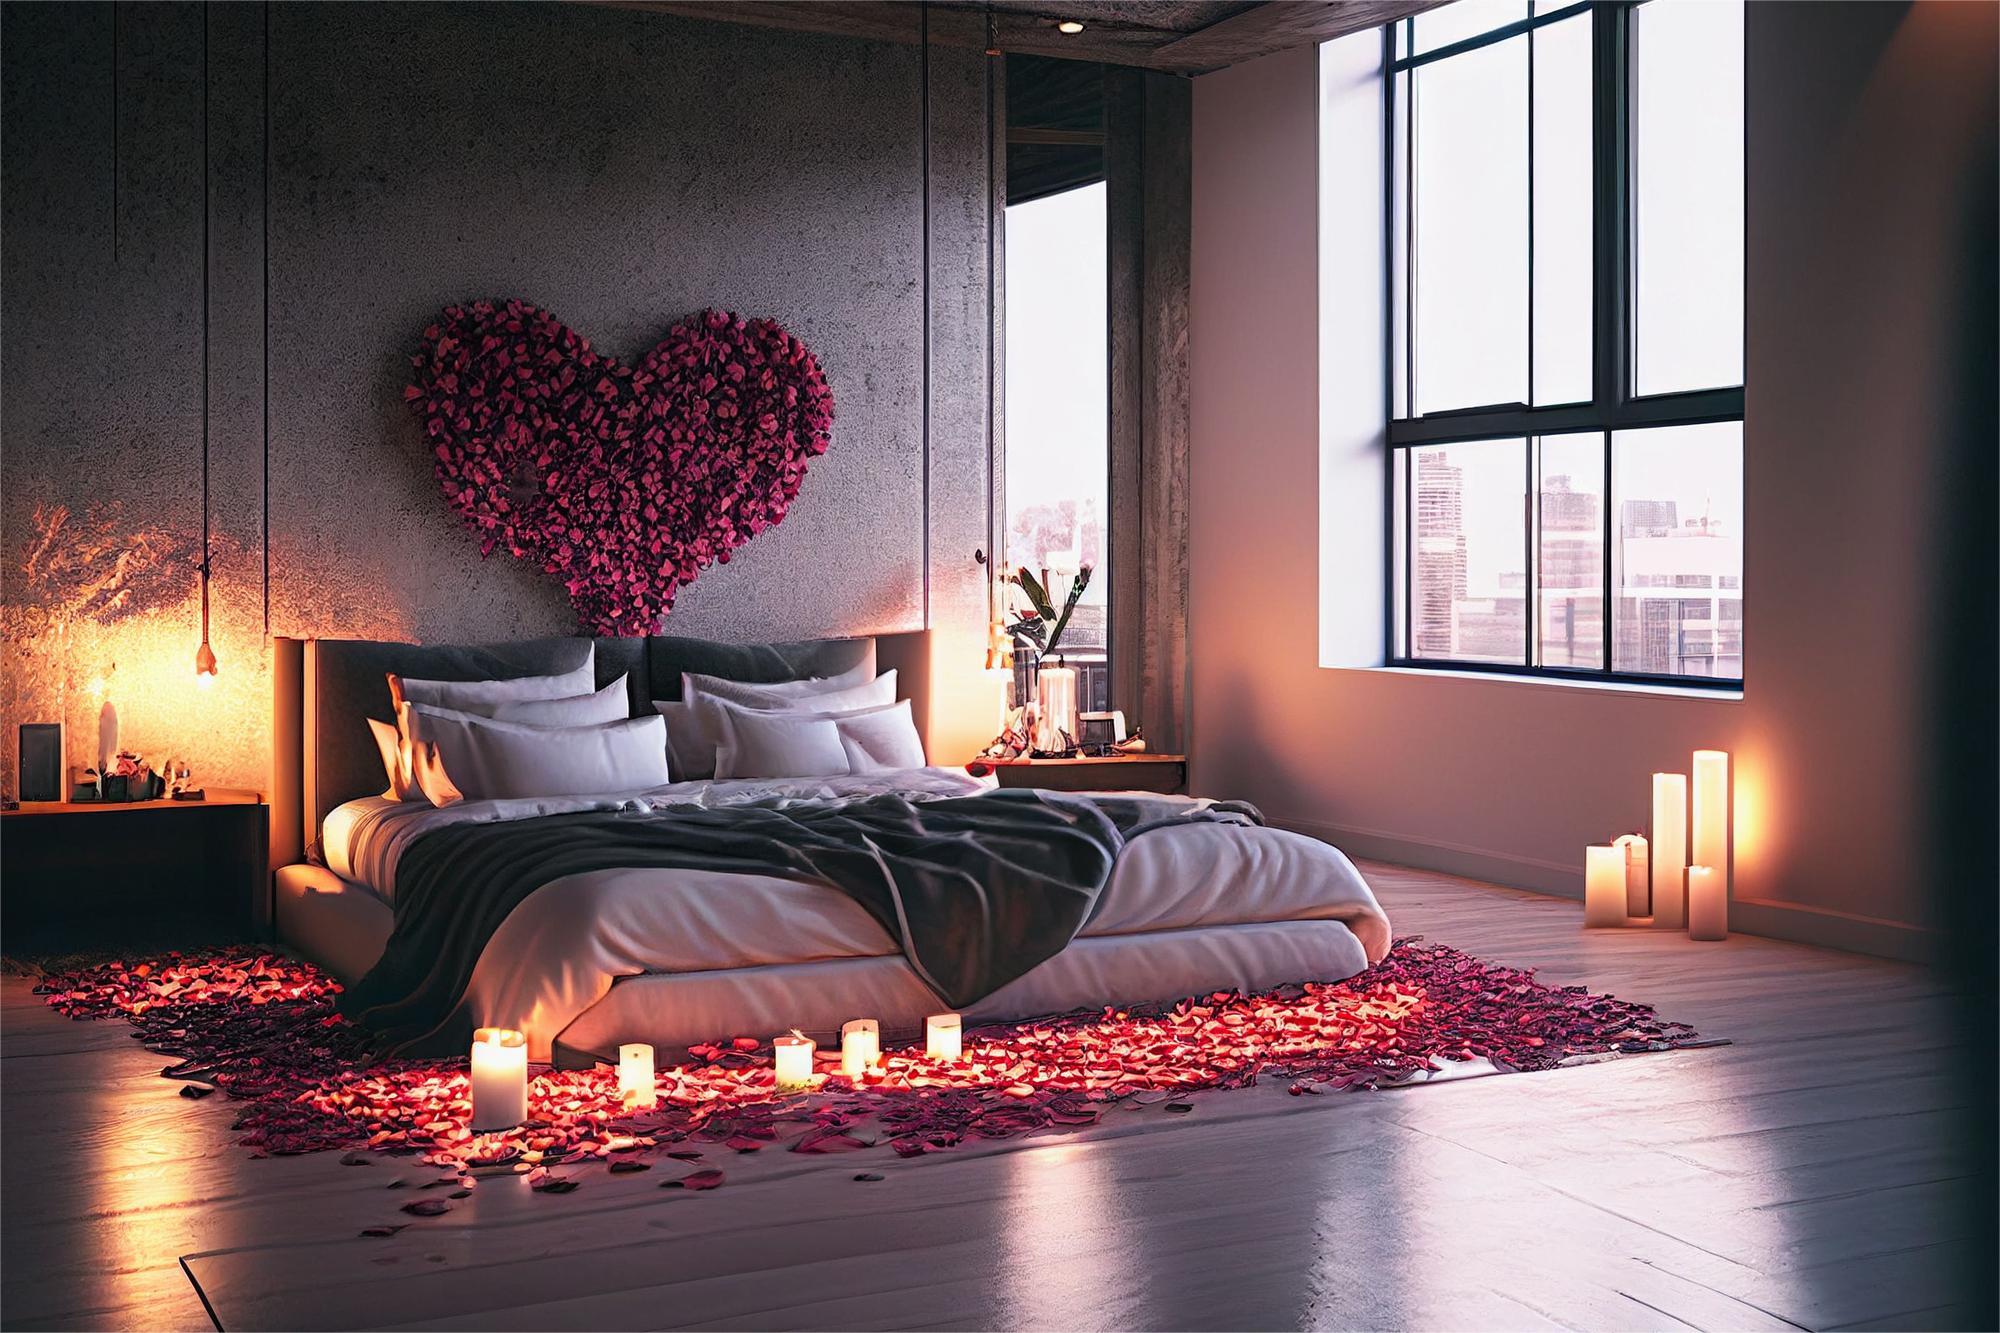 How to create a Valentine’s Day atmosphere with decorations？